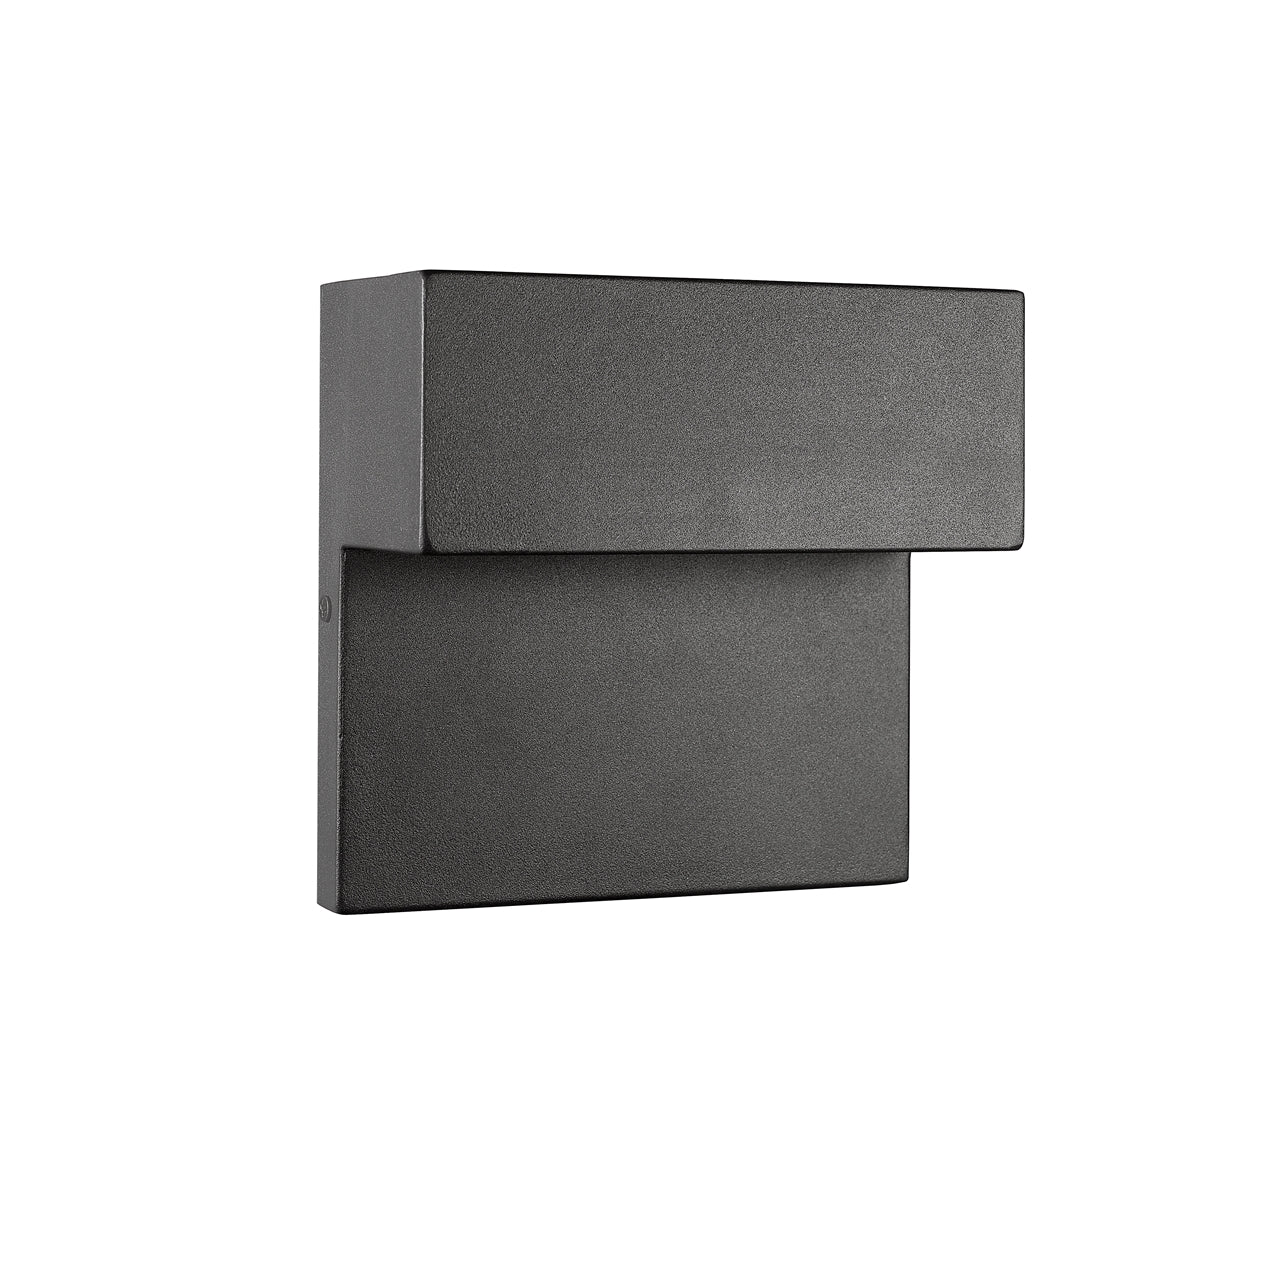 CAMPBELL Contemporary LED Light Textured Black Outdoor Wall Sconce 6" Tall